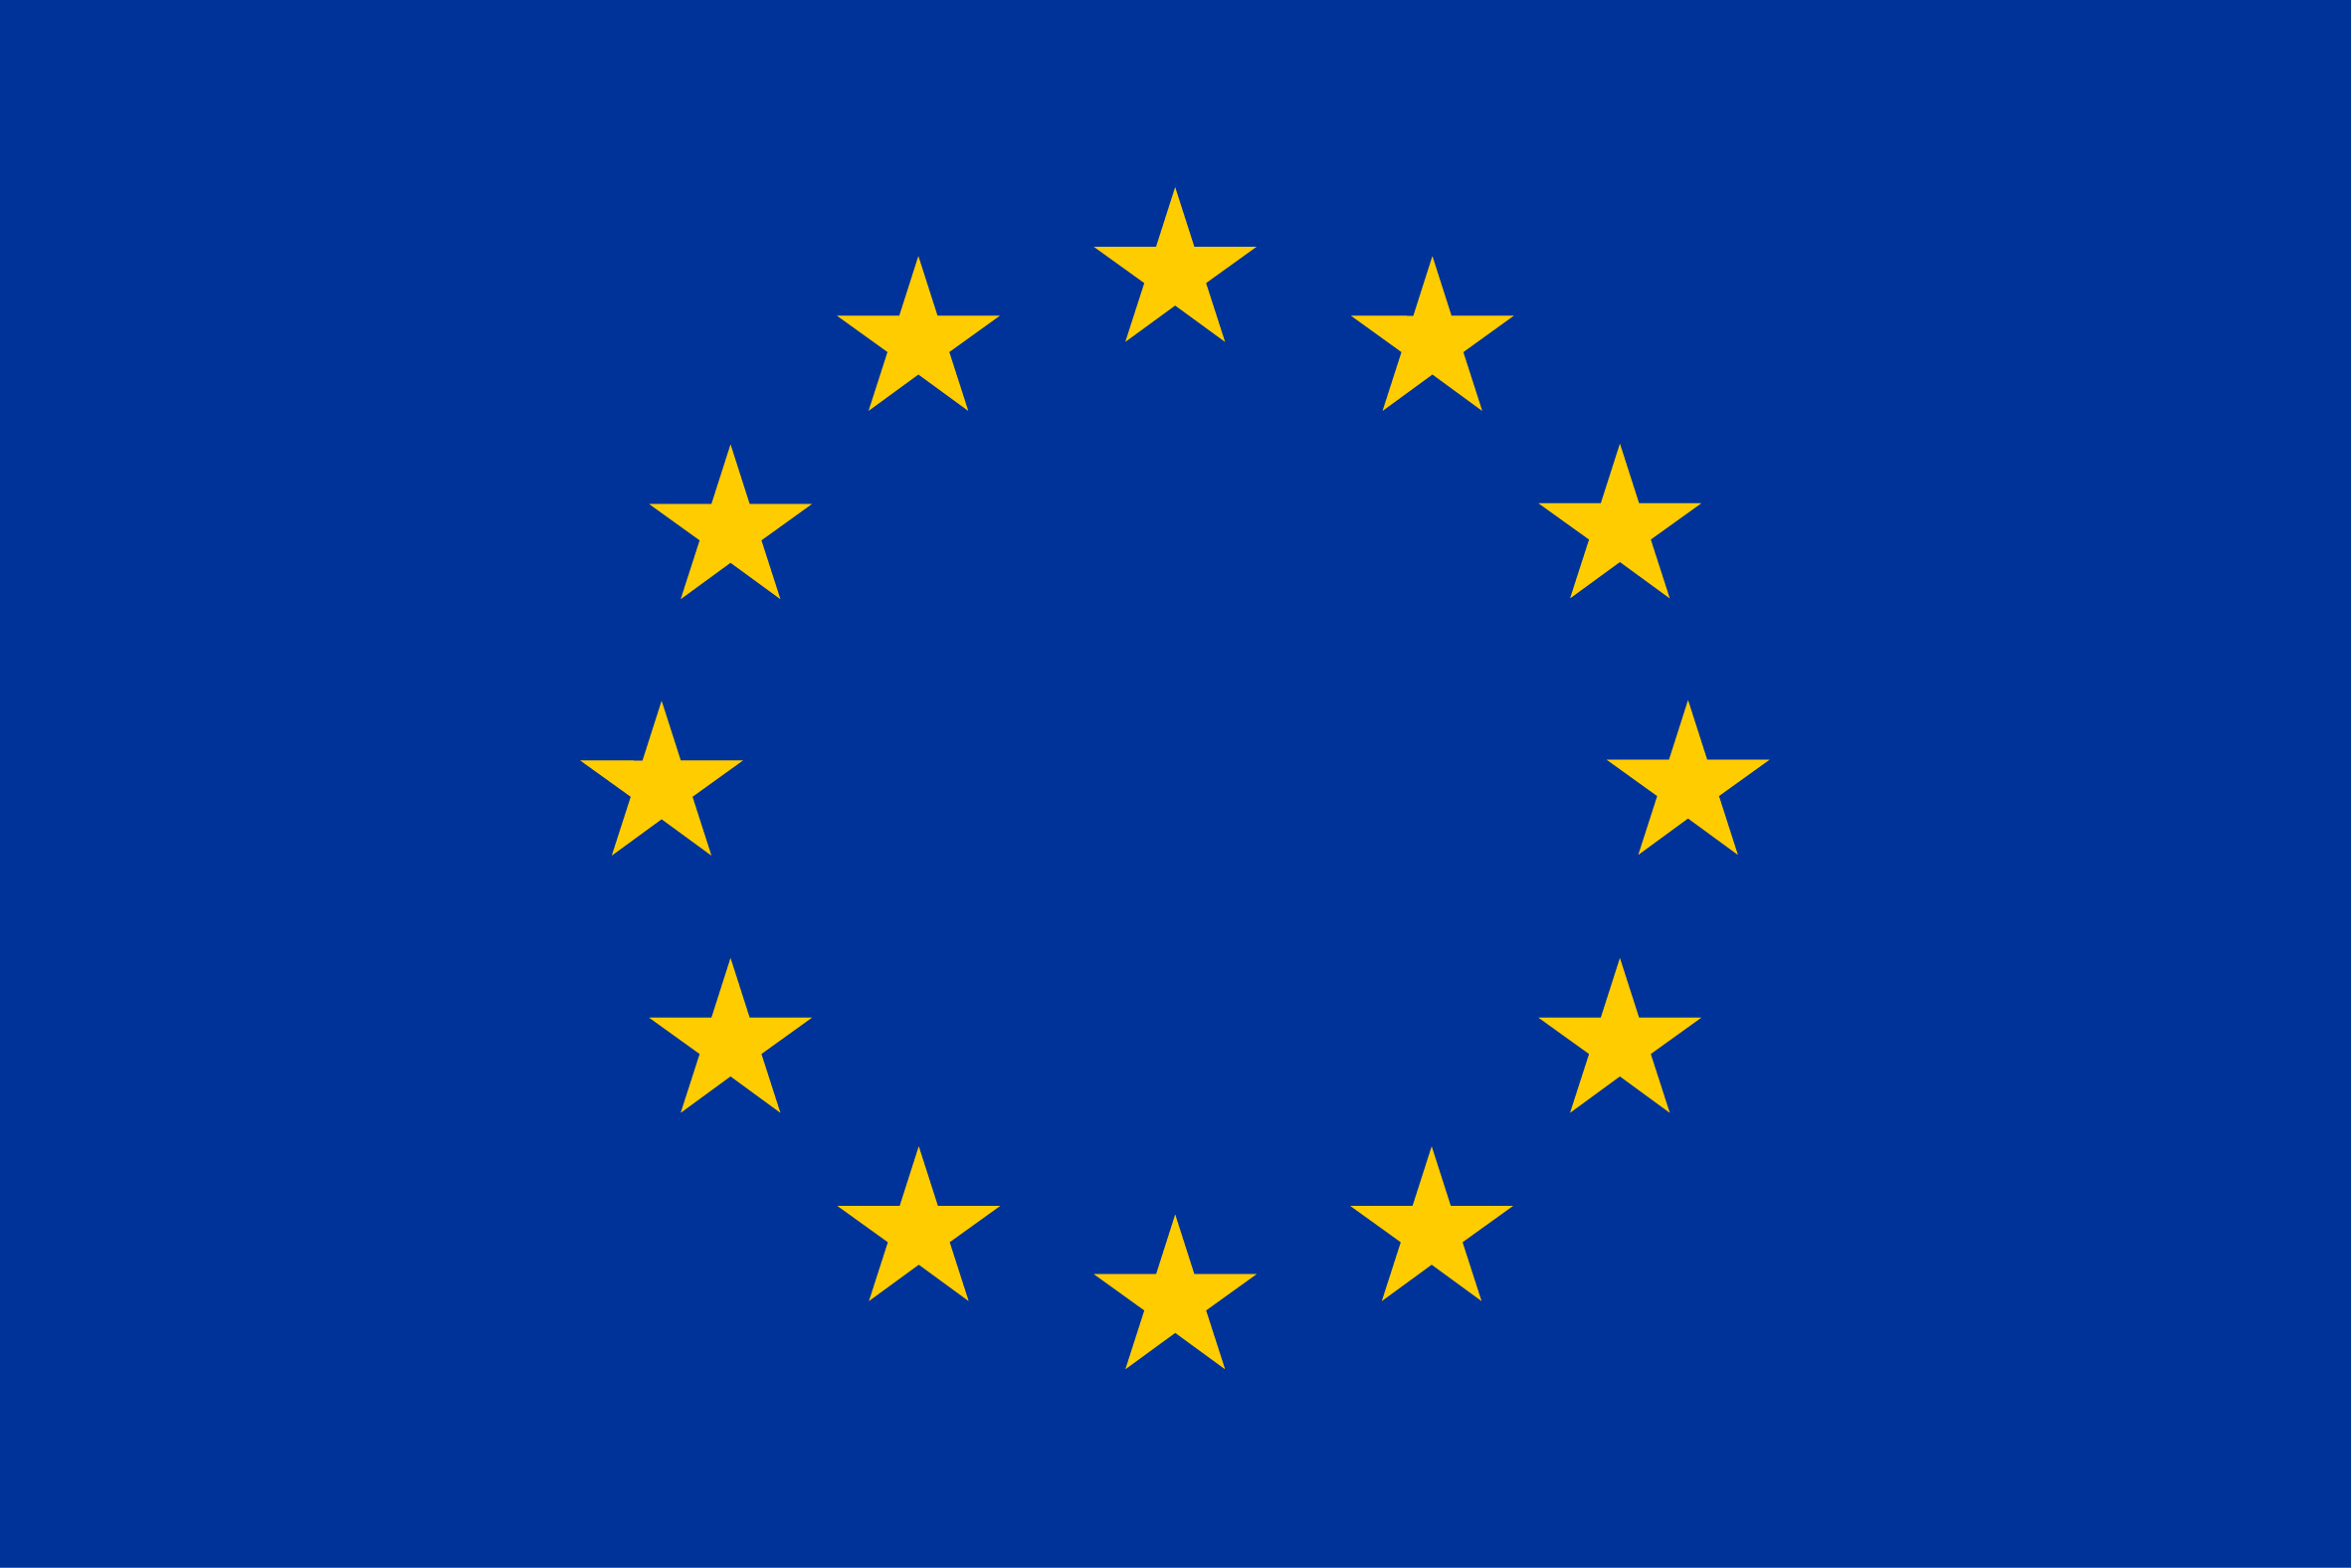 The flag of the European Union. It consists of twelve yellow stars on blue background.